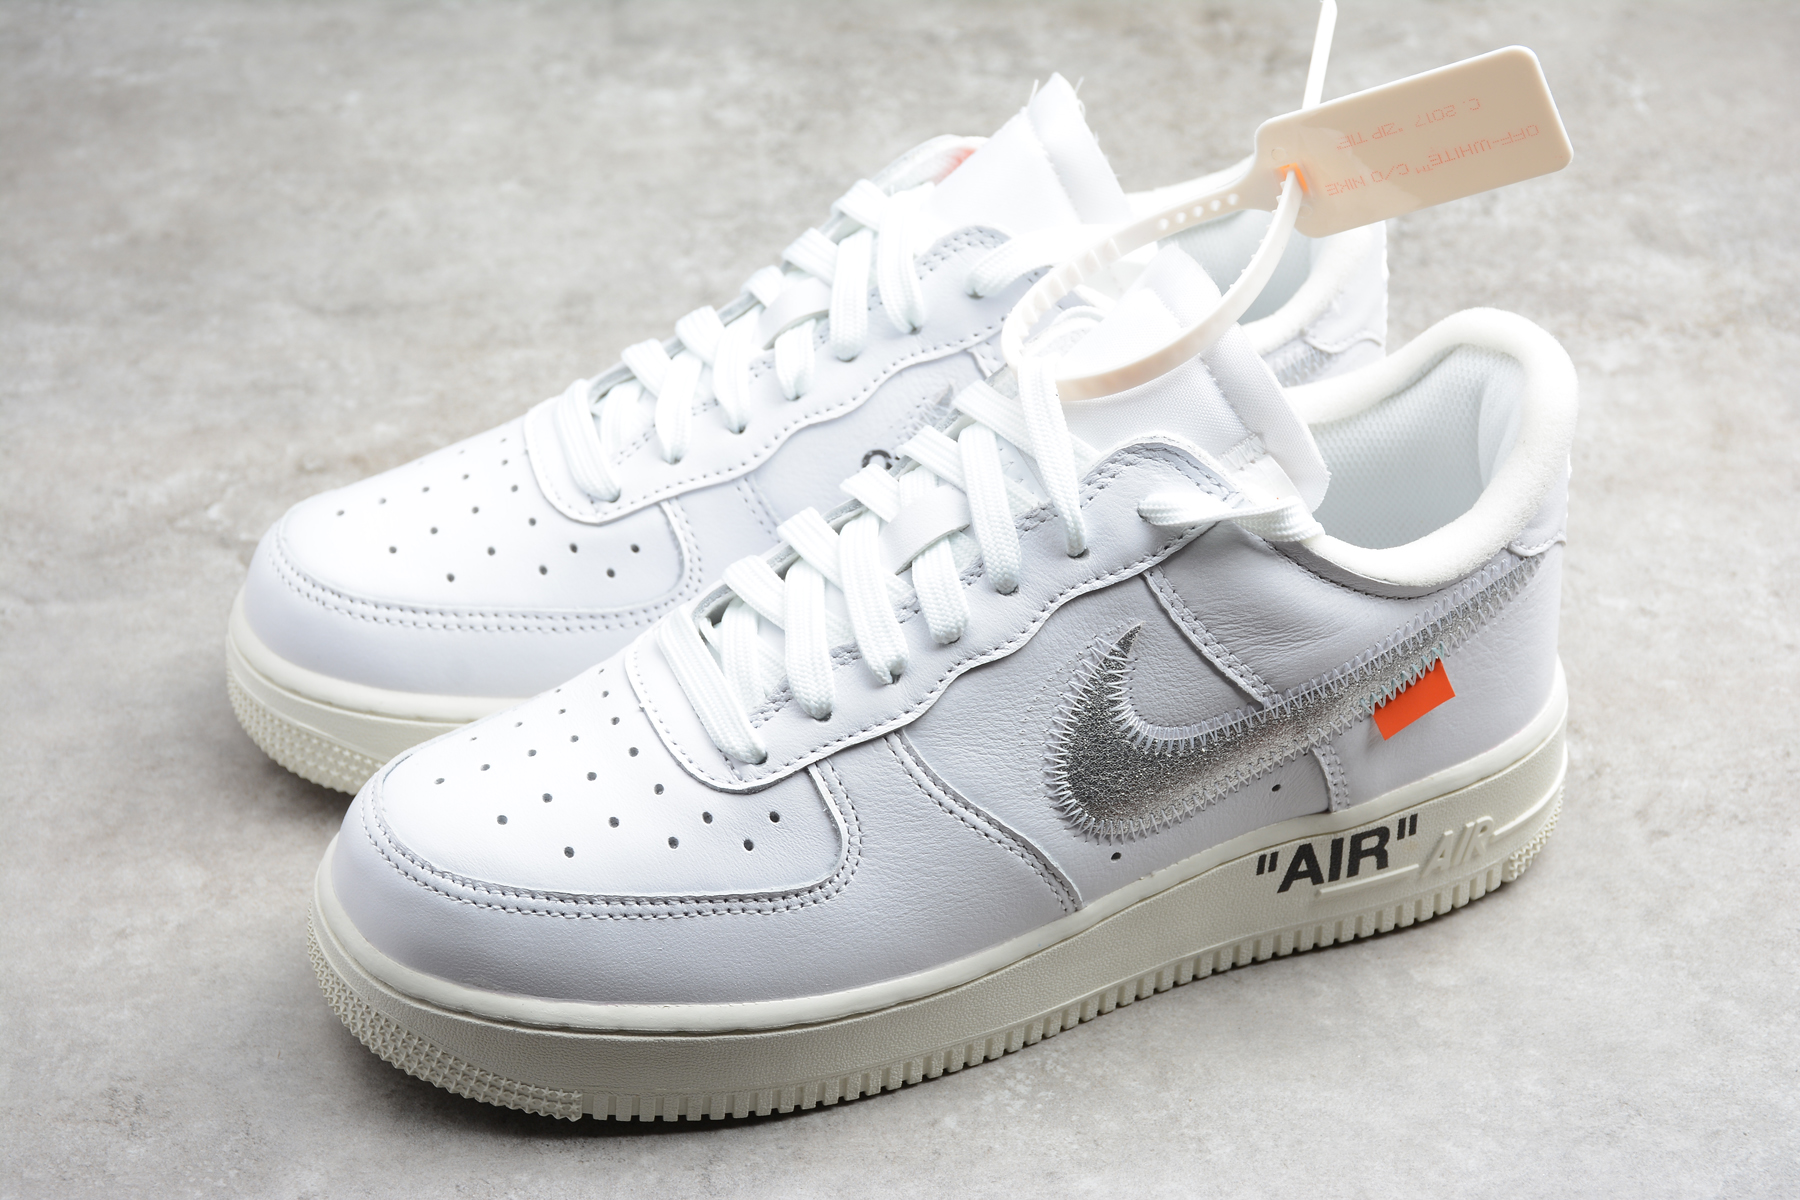 Nike Air Force 1 Low Virgil Abloh Off-White (AF100) - AO4297-100 — dropout